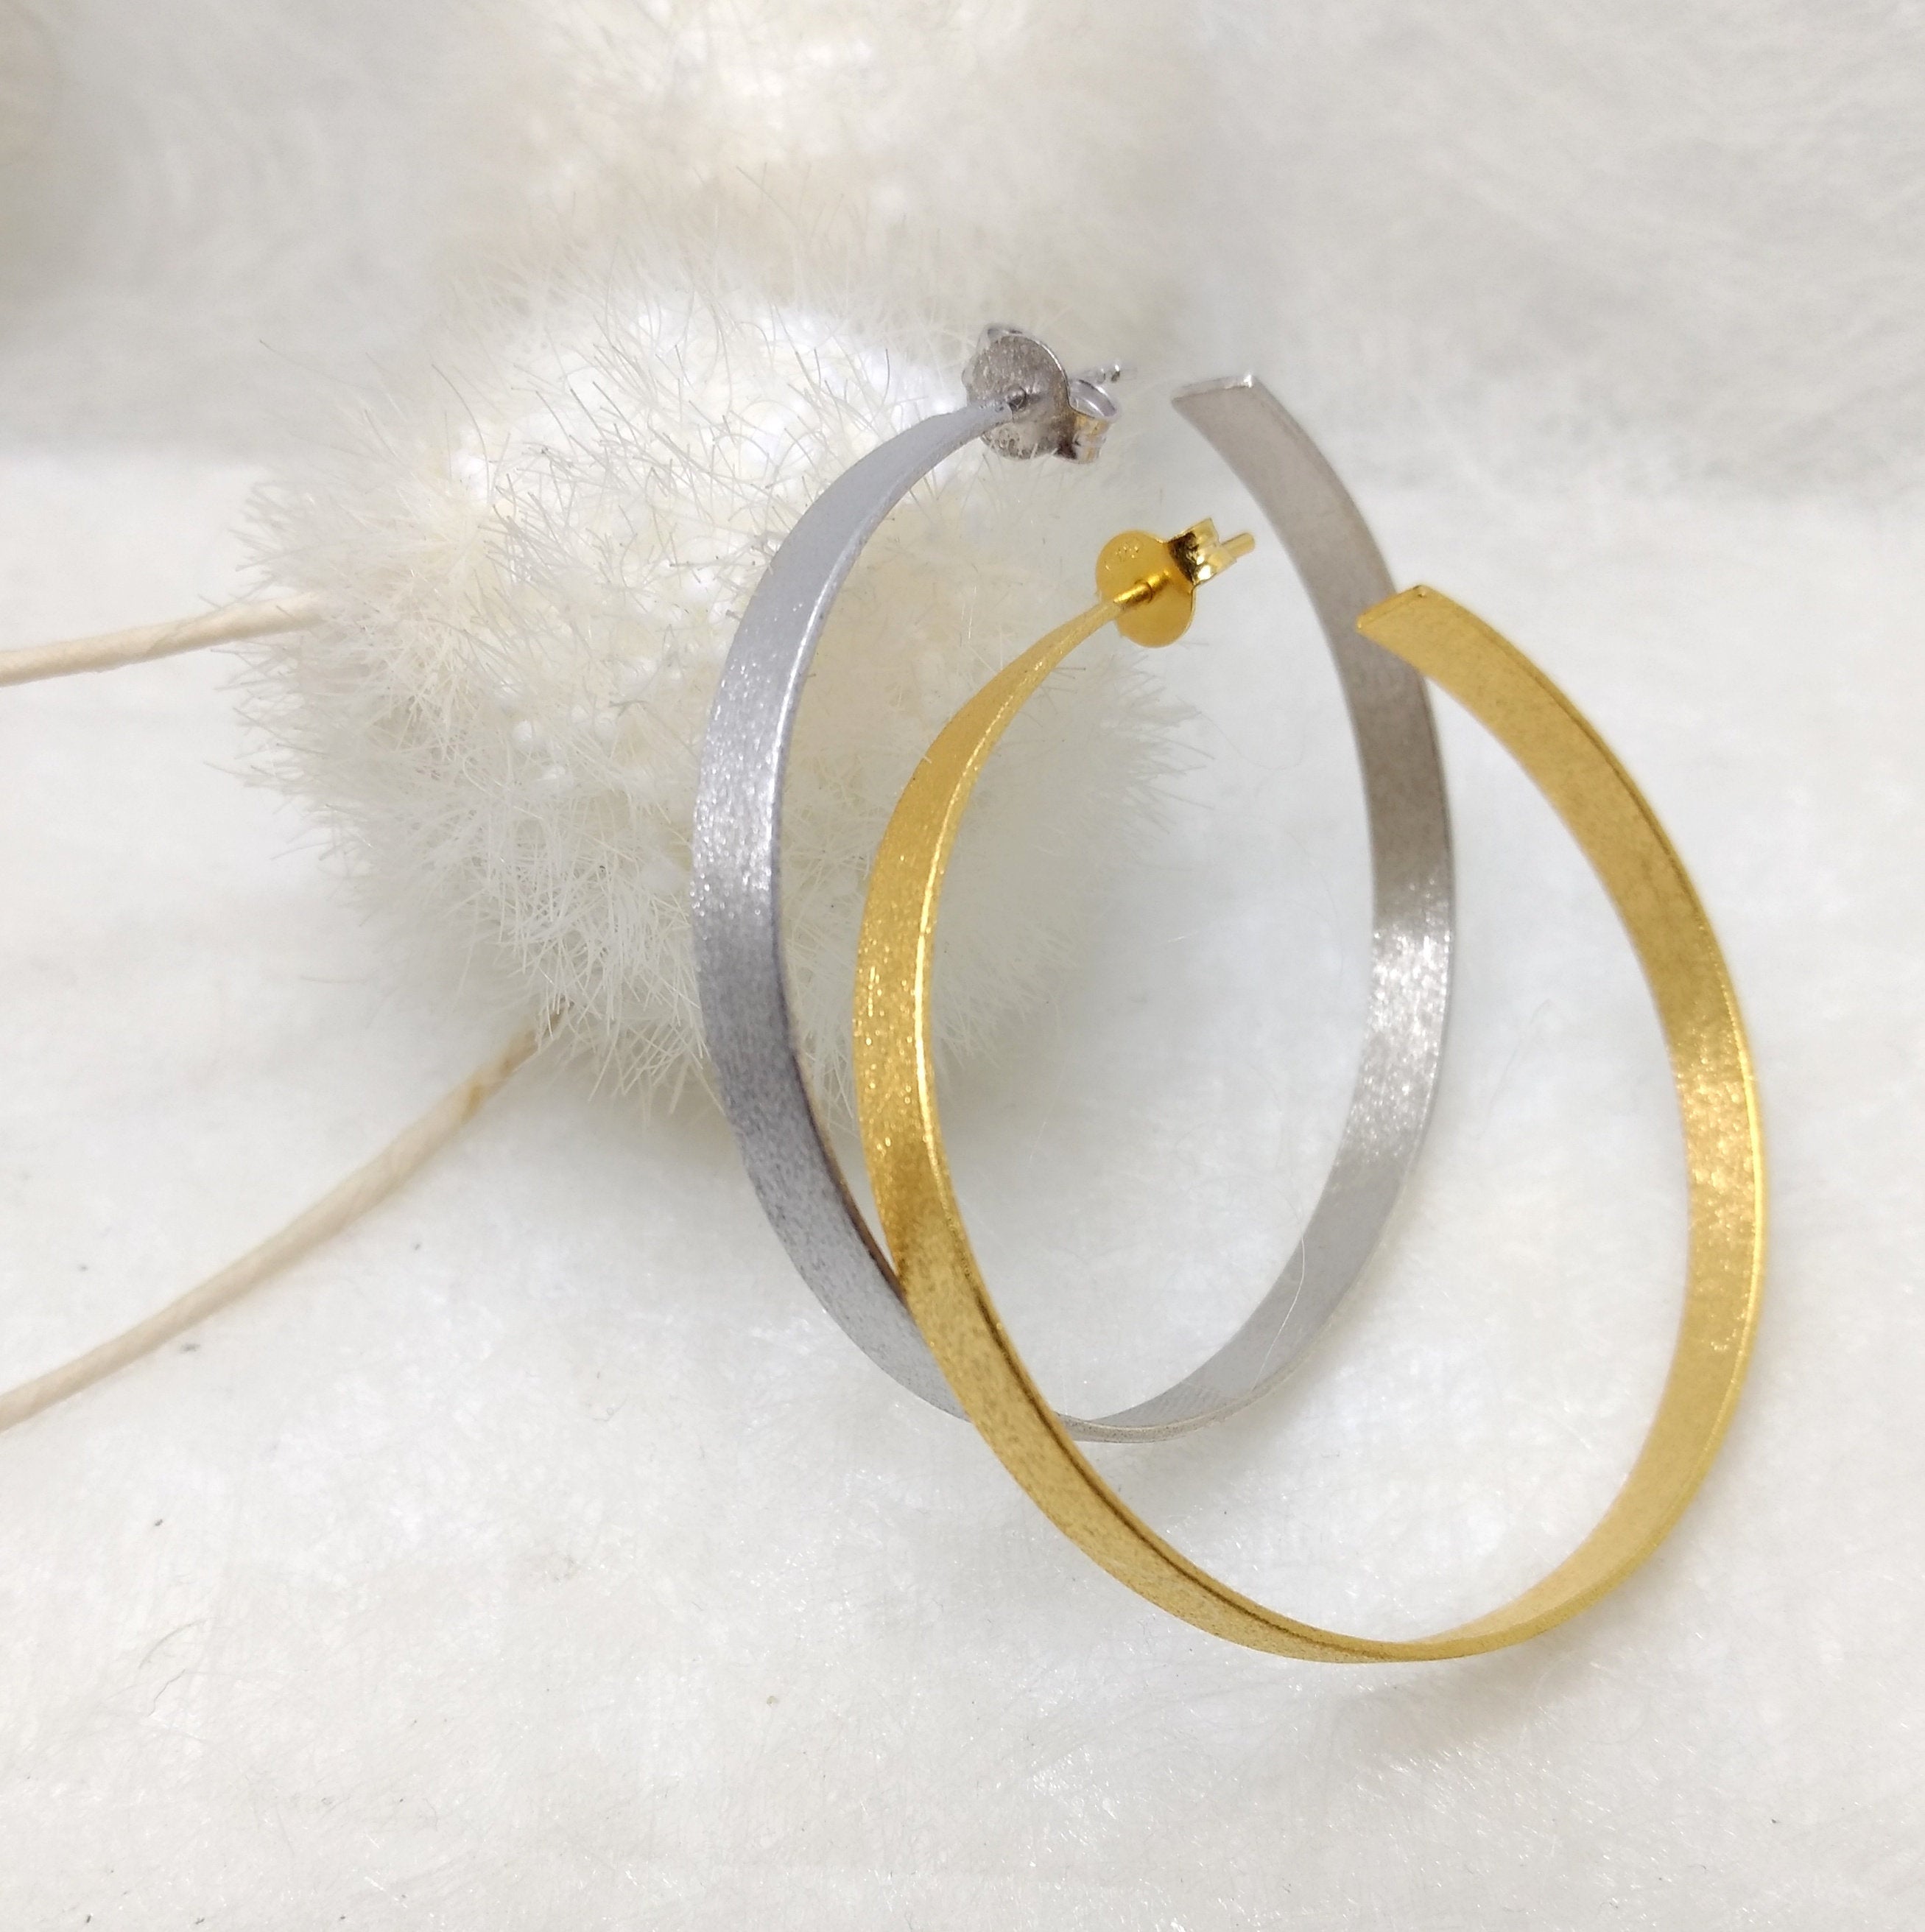 ImNos - big (ø 45 mm) Sterling Silver hoops, rhodium or gold plated